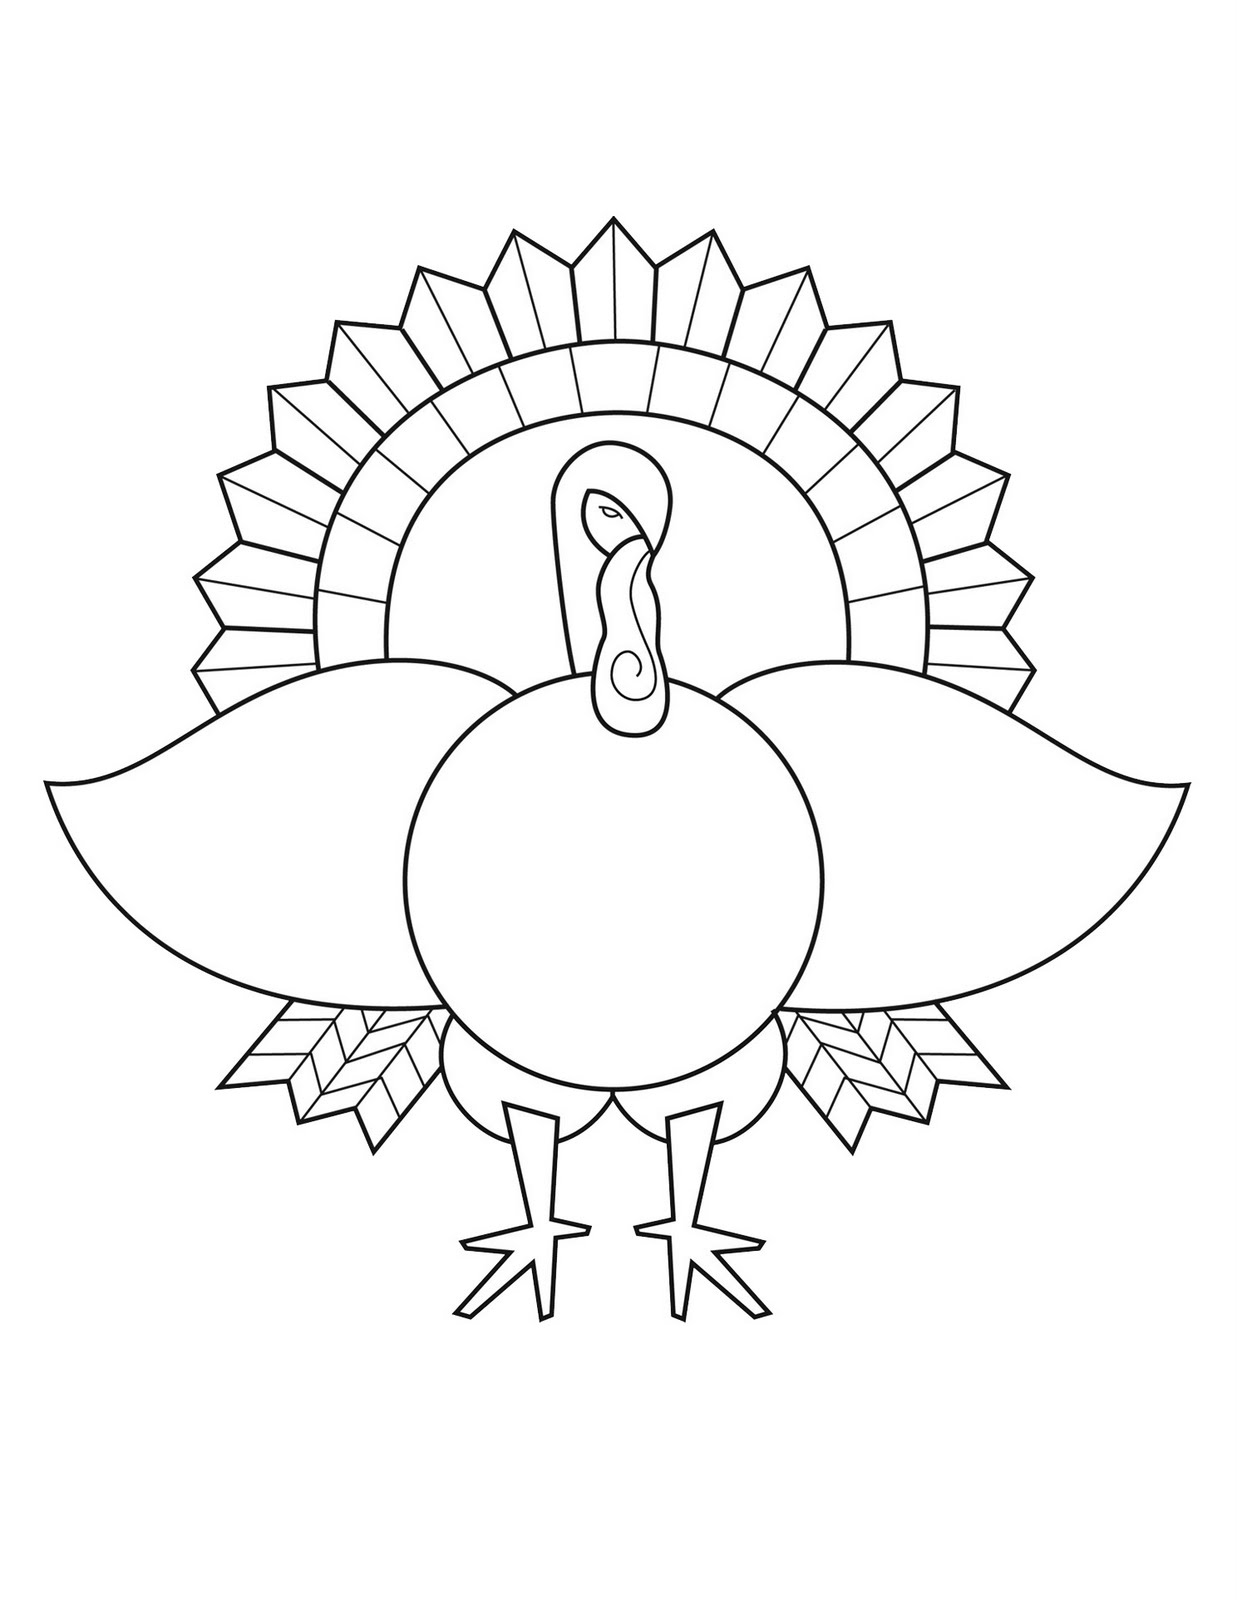 Turkey Coloring Page - Art Projects for Kids